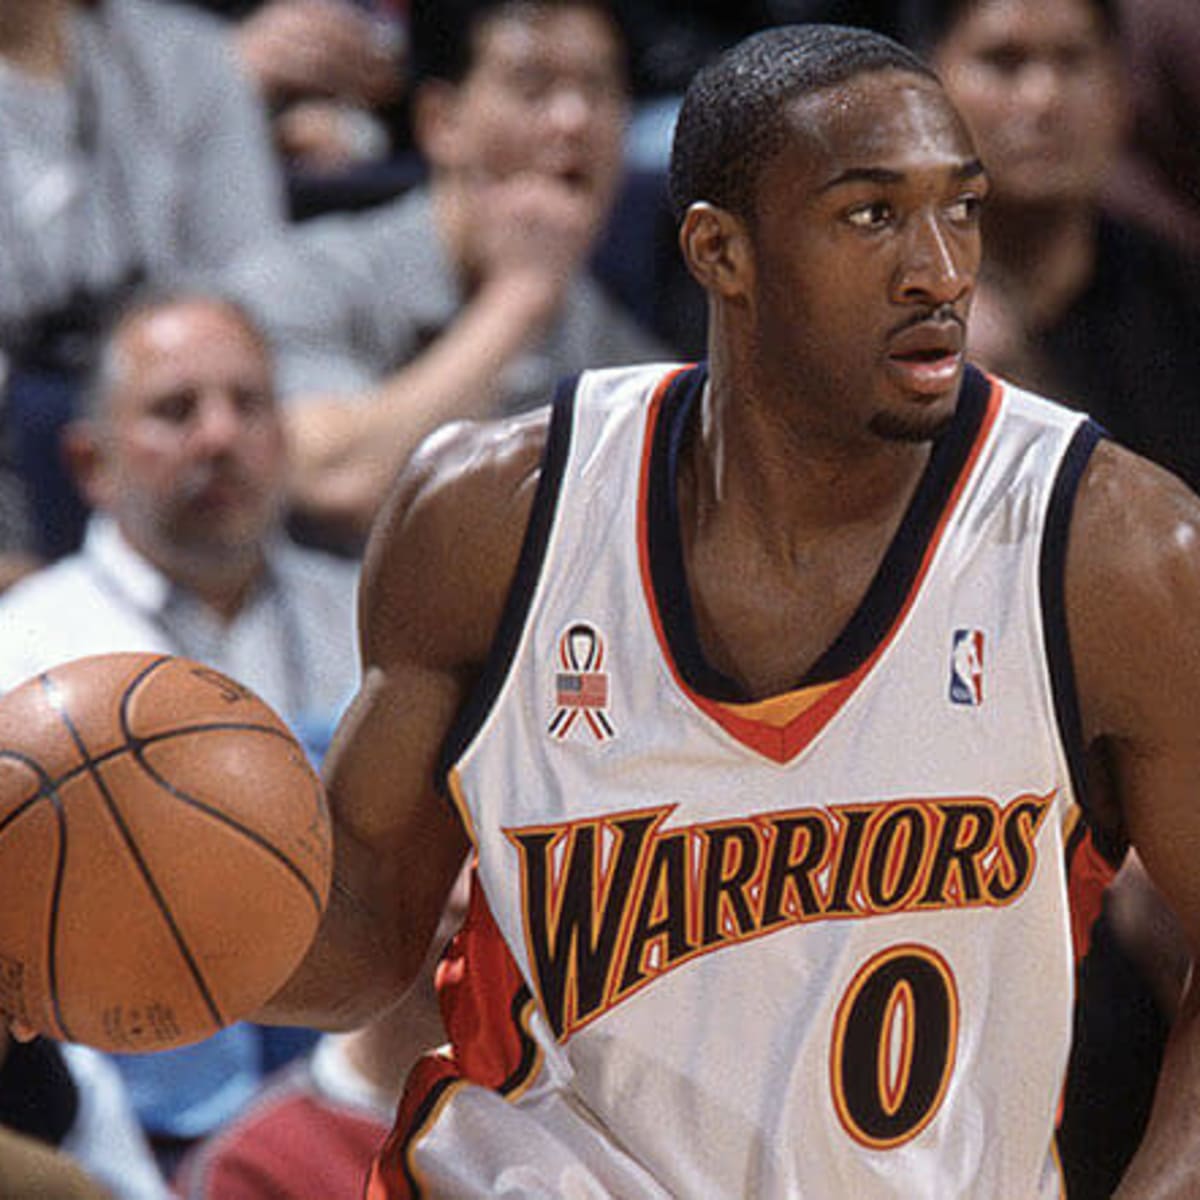 Gilbert Arenas shares a story behind jersey number 0 - Basketball Network -  Your daily dose of basketball